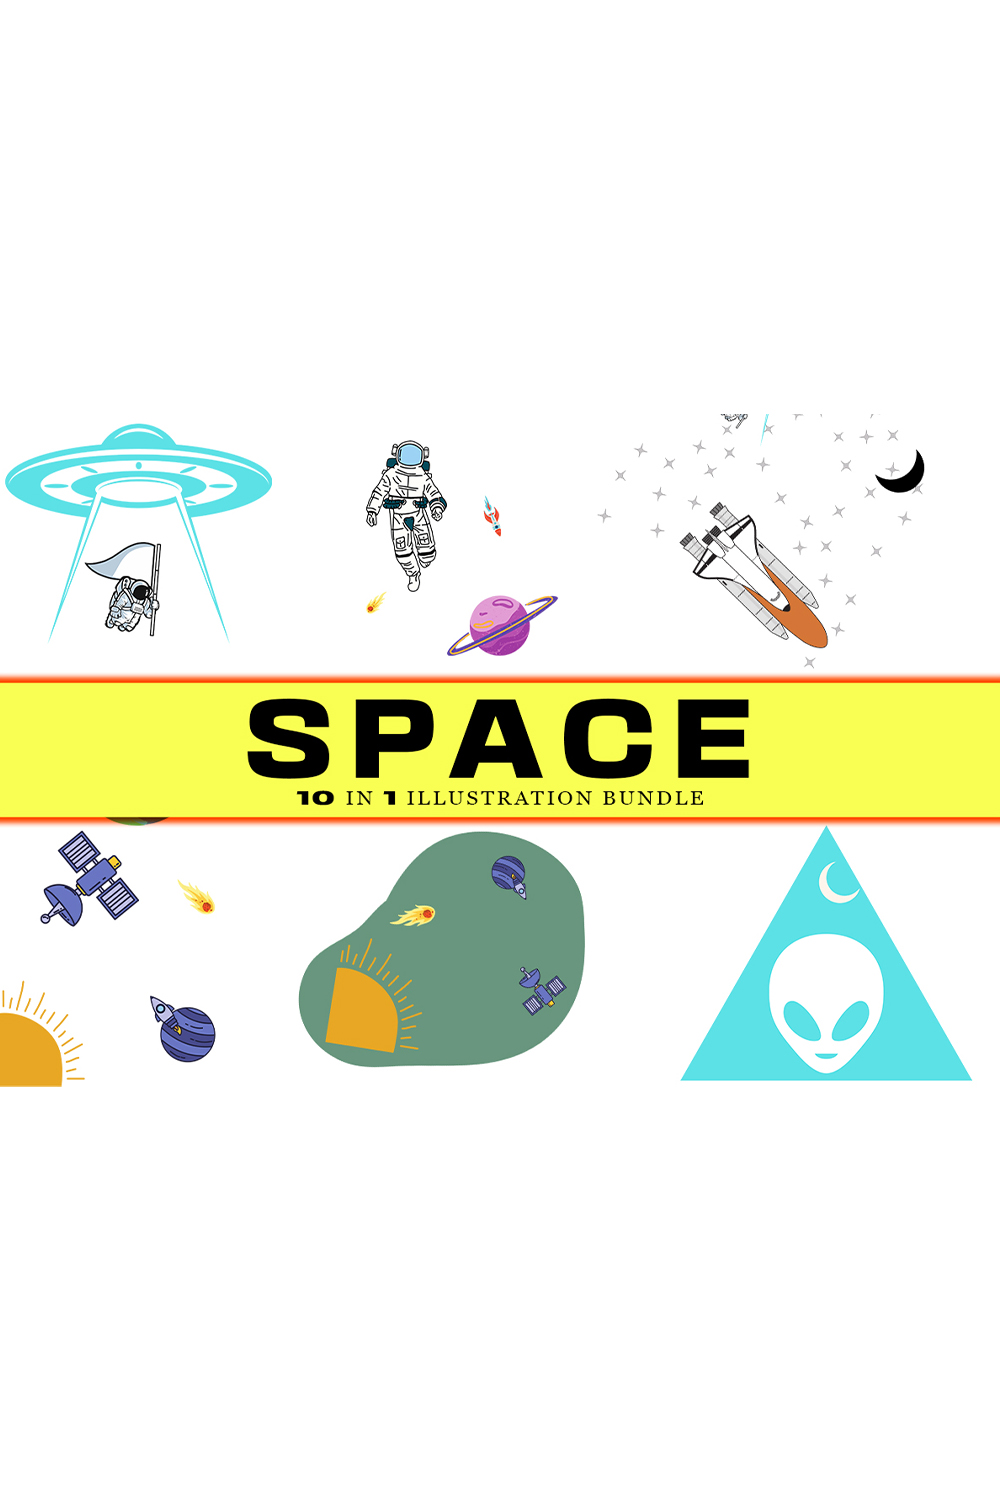 A pack of unique images on the theme of space